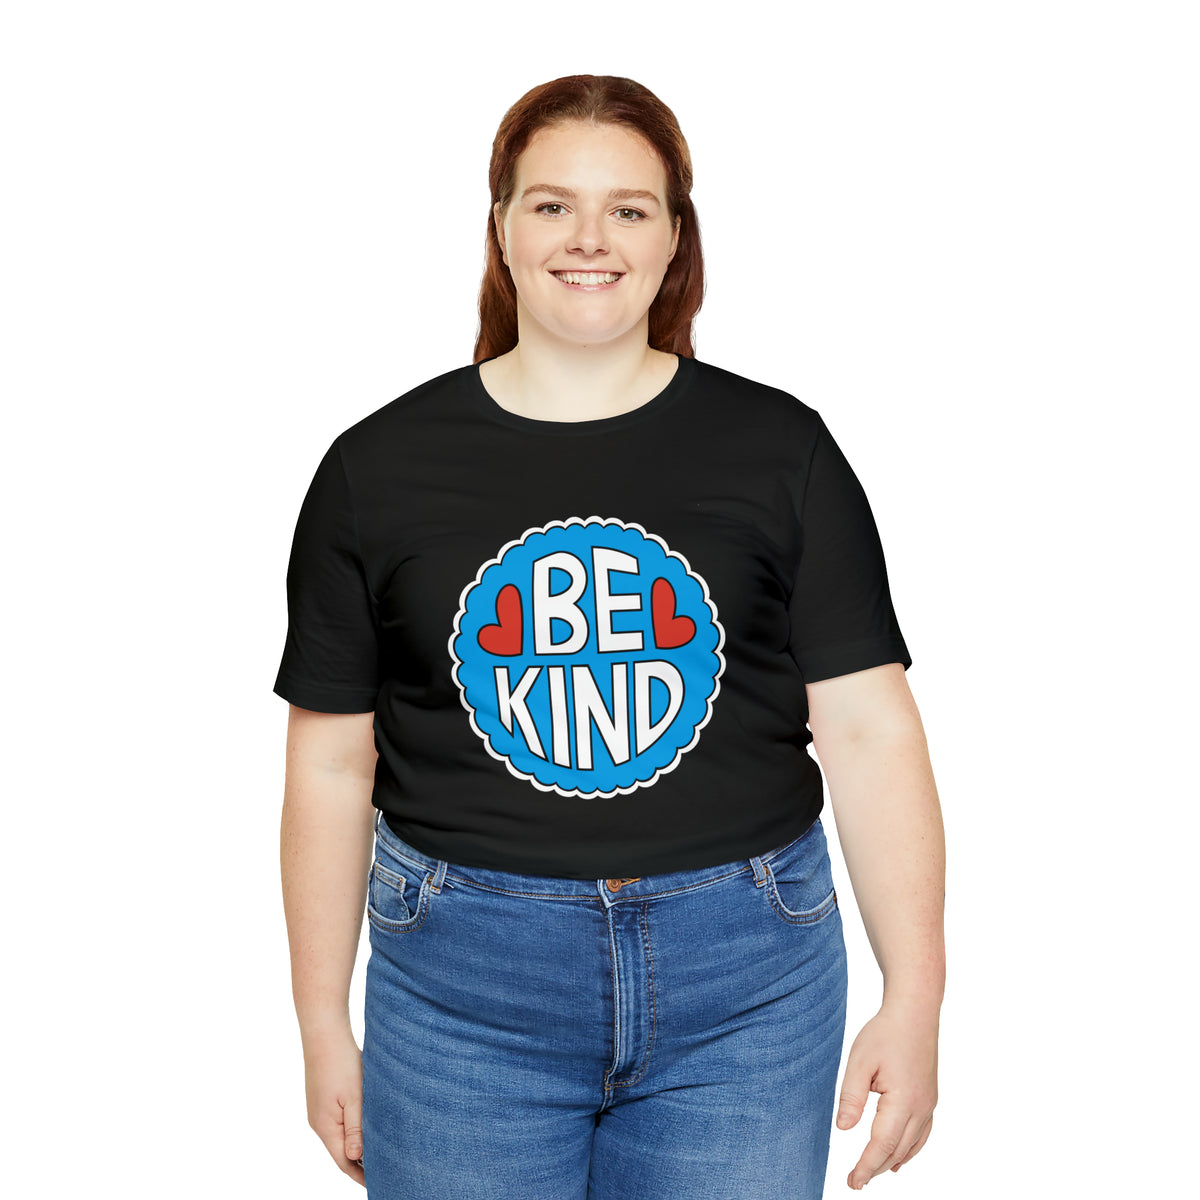 Be Kind - Band Style Tee